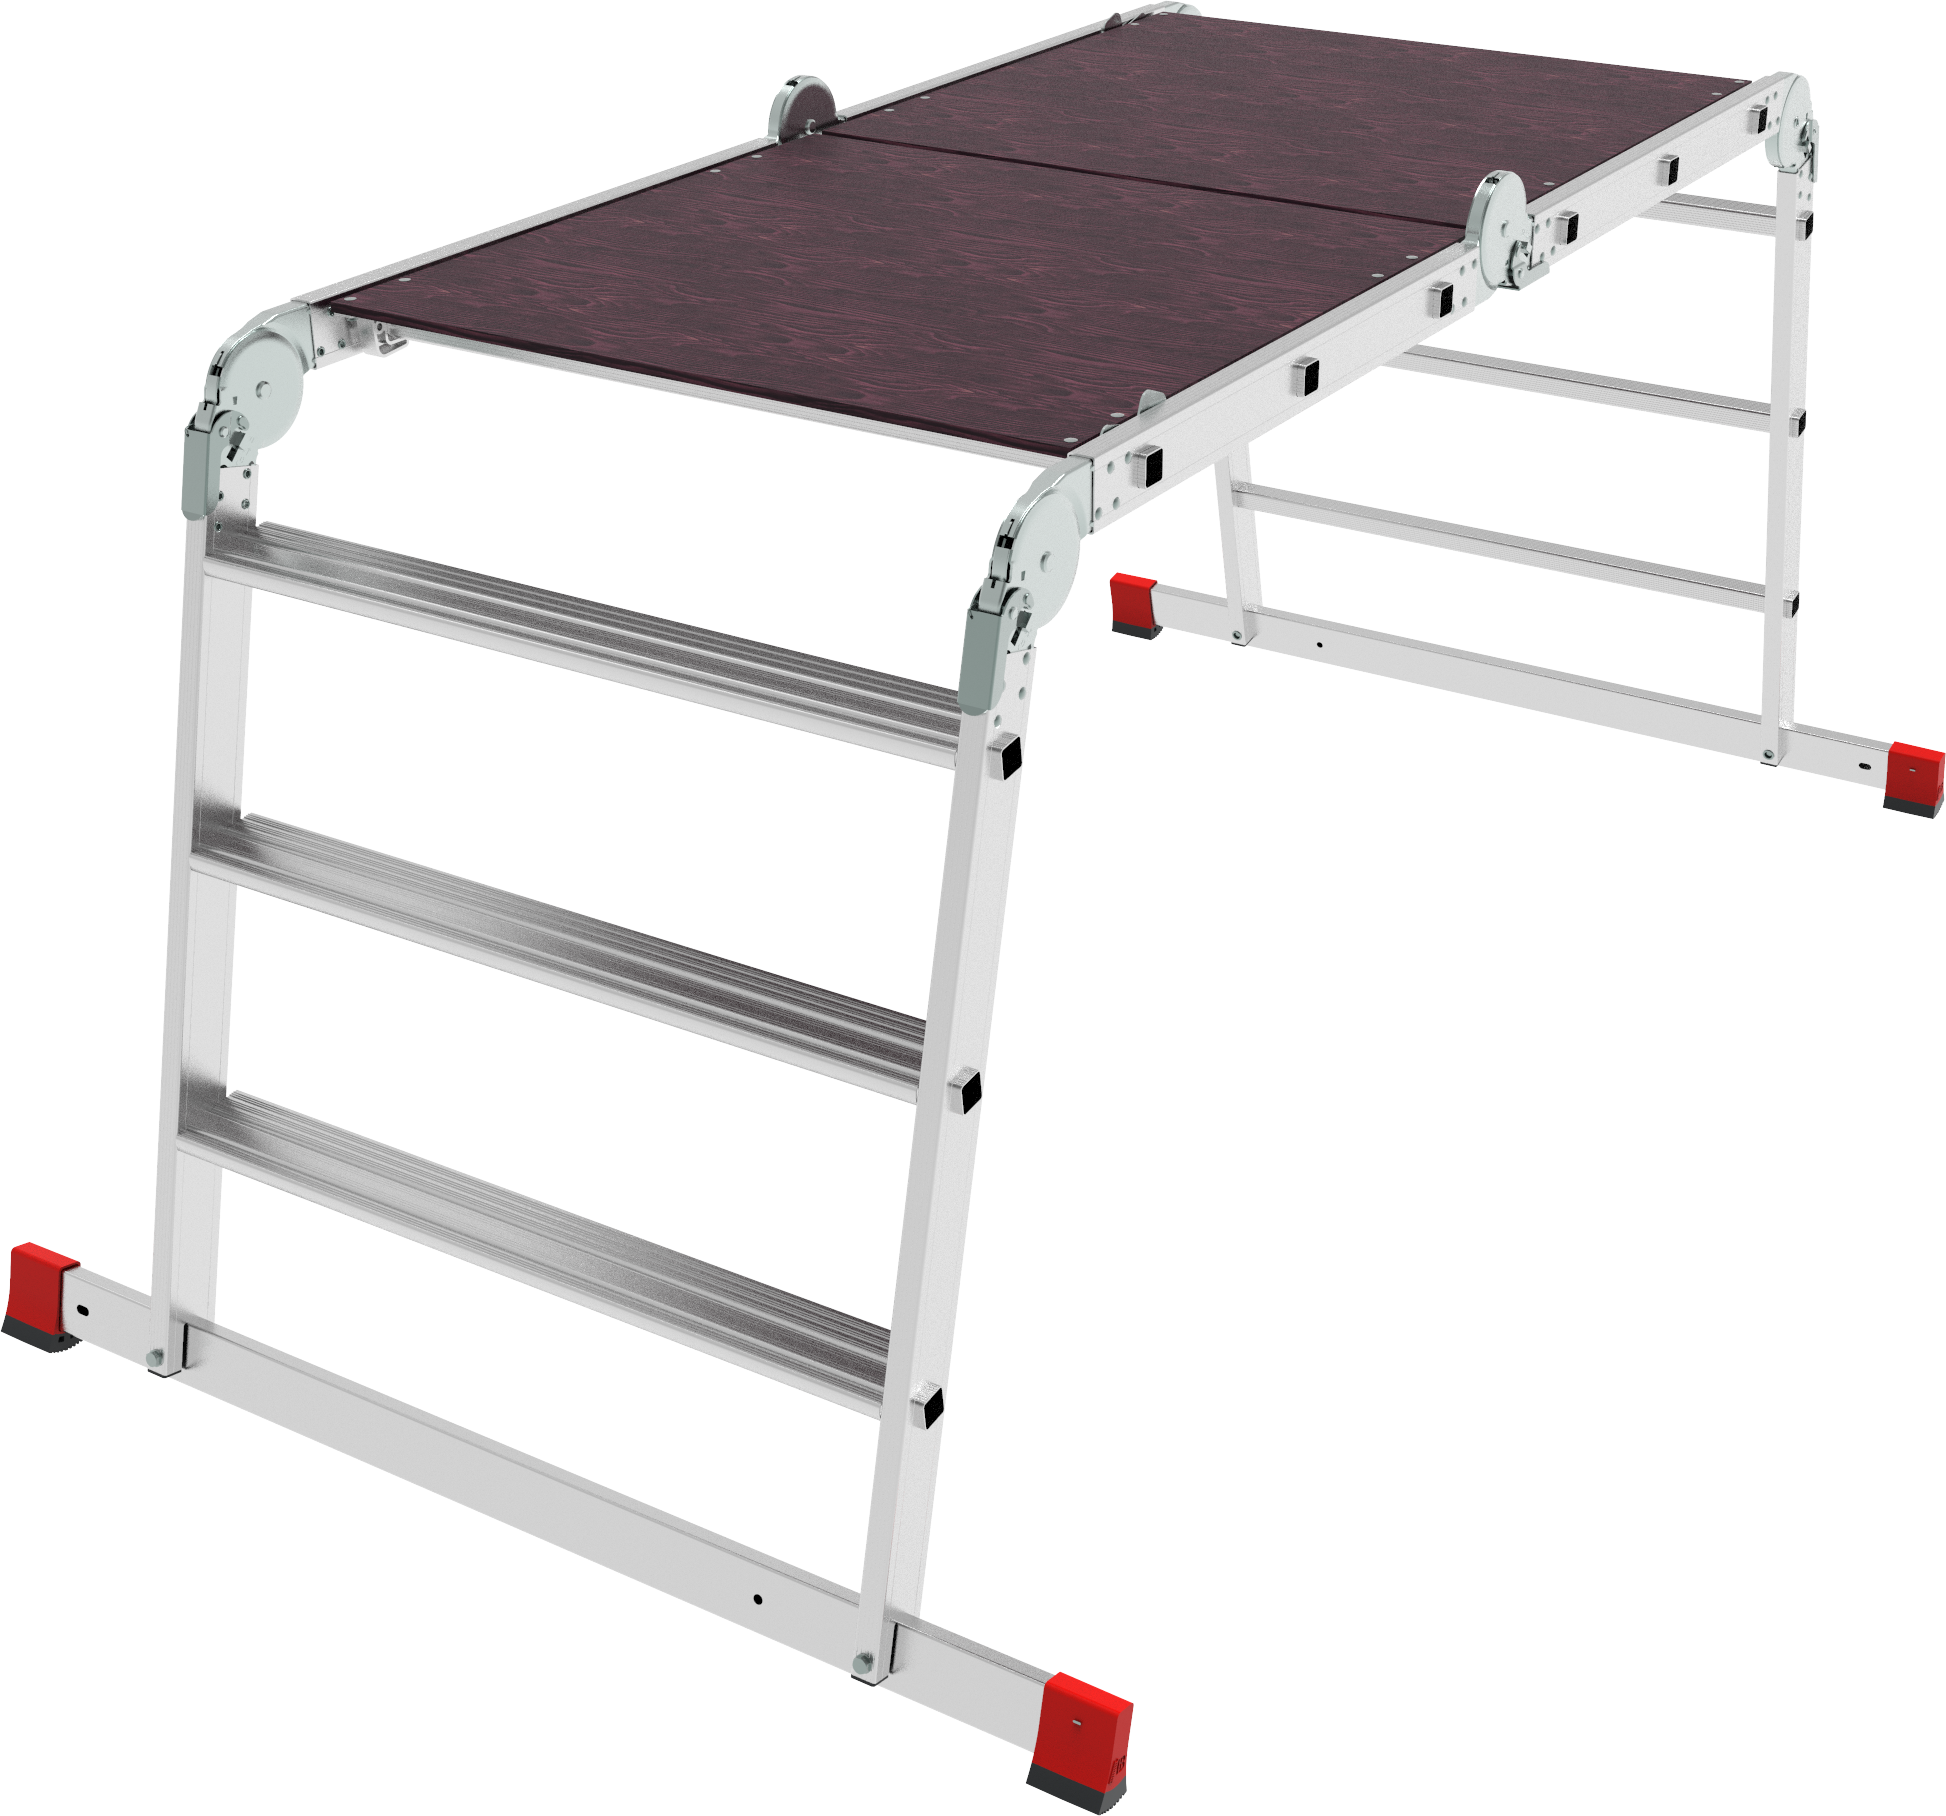 Multipurpose aluminum professional hinged rung ladder 800 mm width with 80 mm flanged steps and platform NV3336 sku 3336403